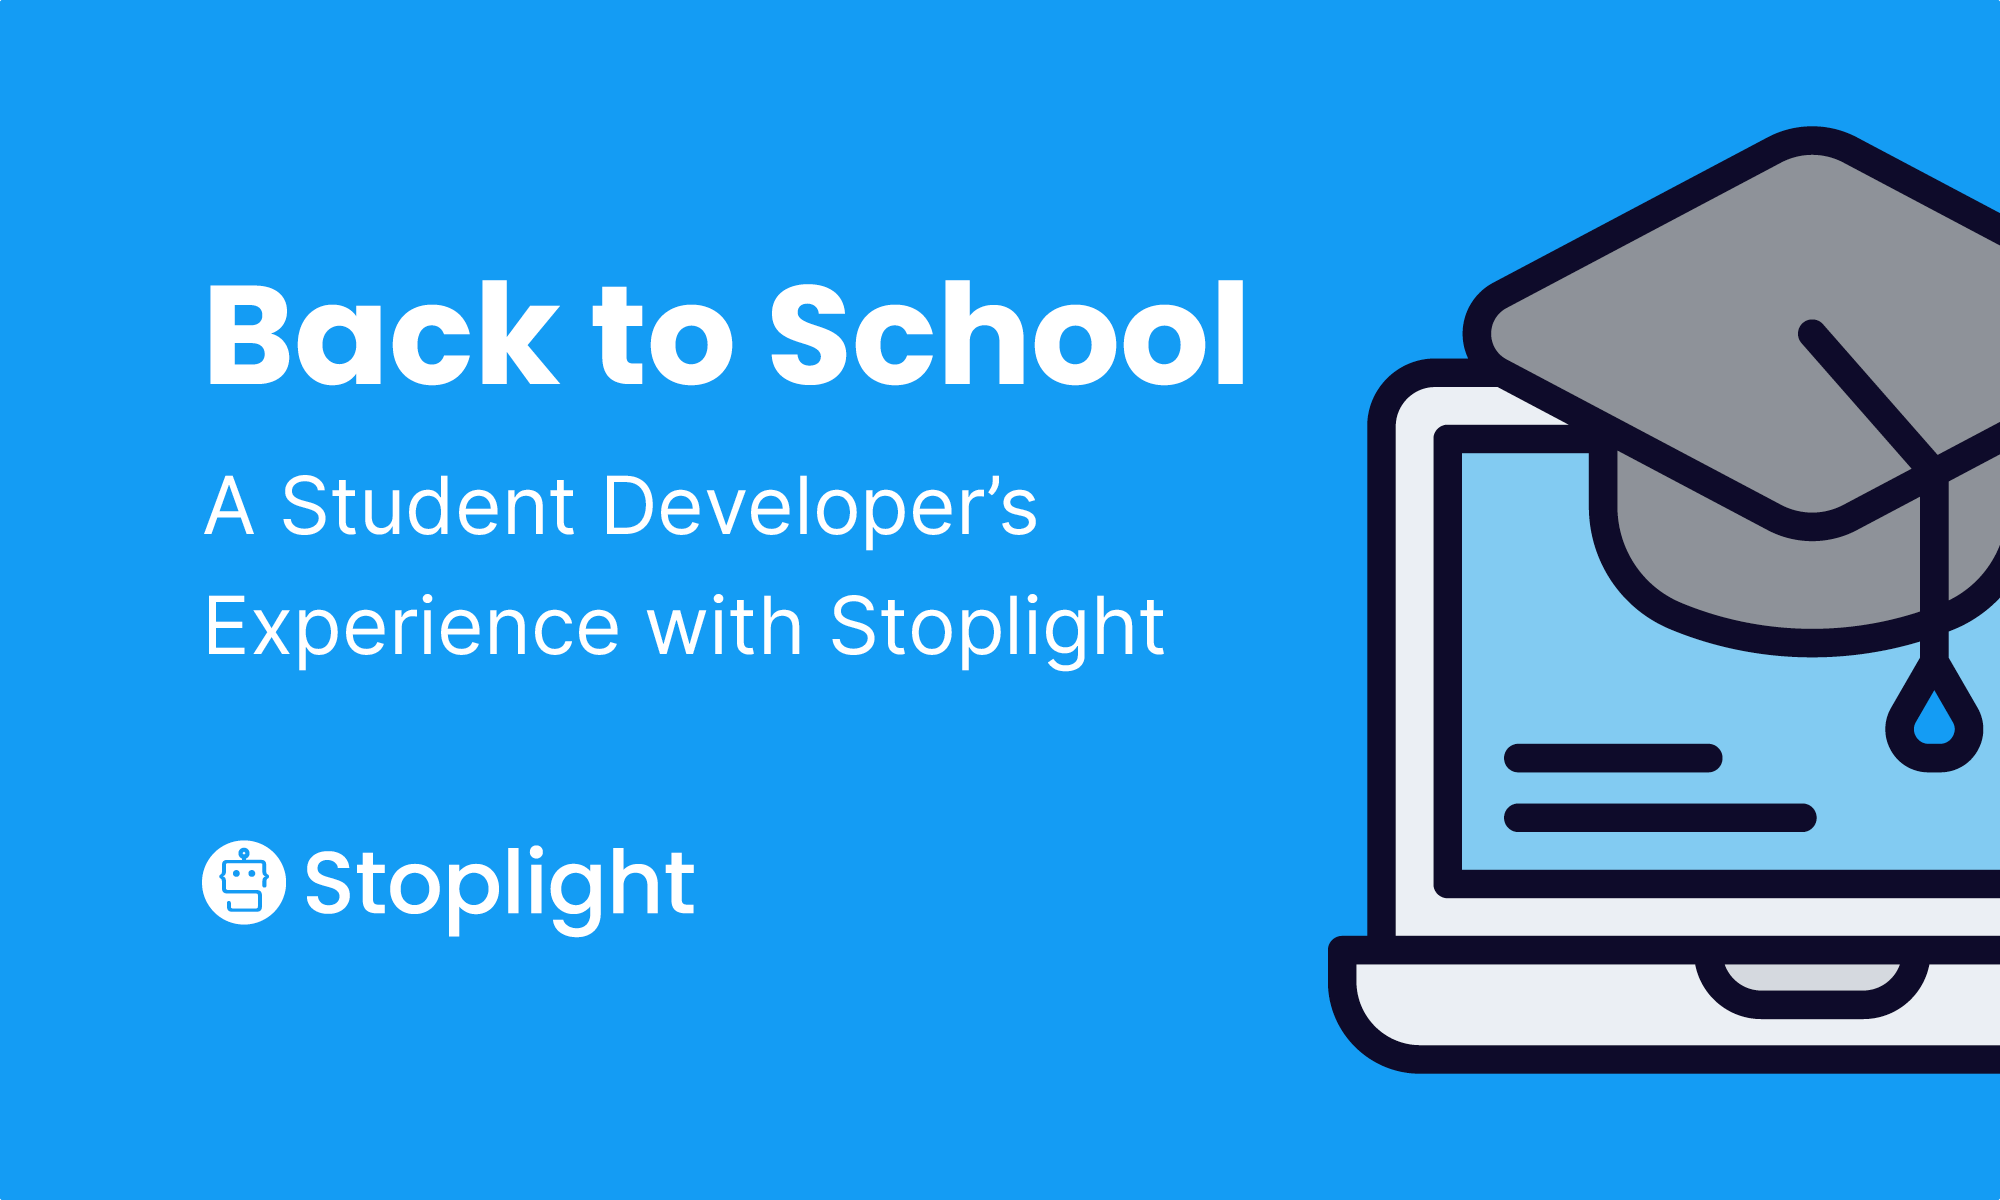 Back to School: a Student Developer’s Experience with Stoplight